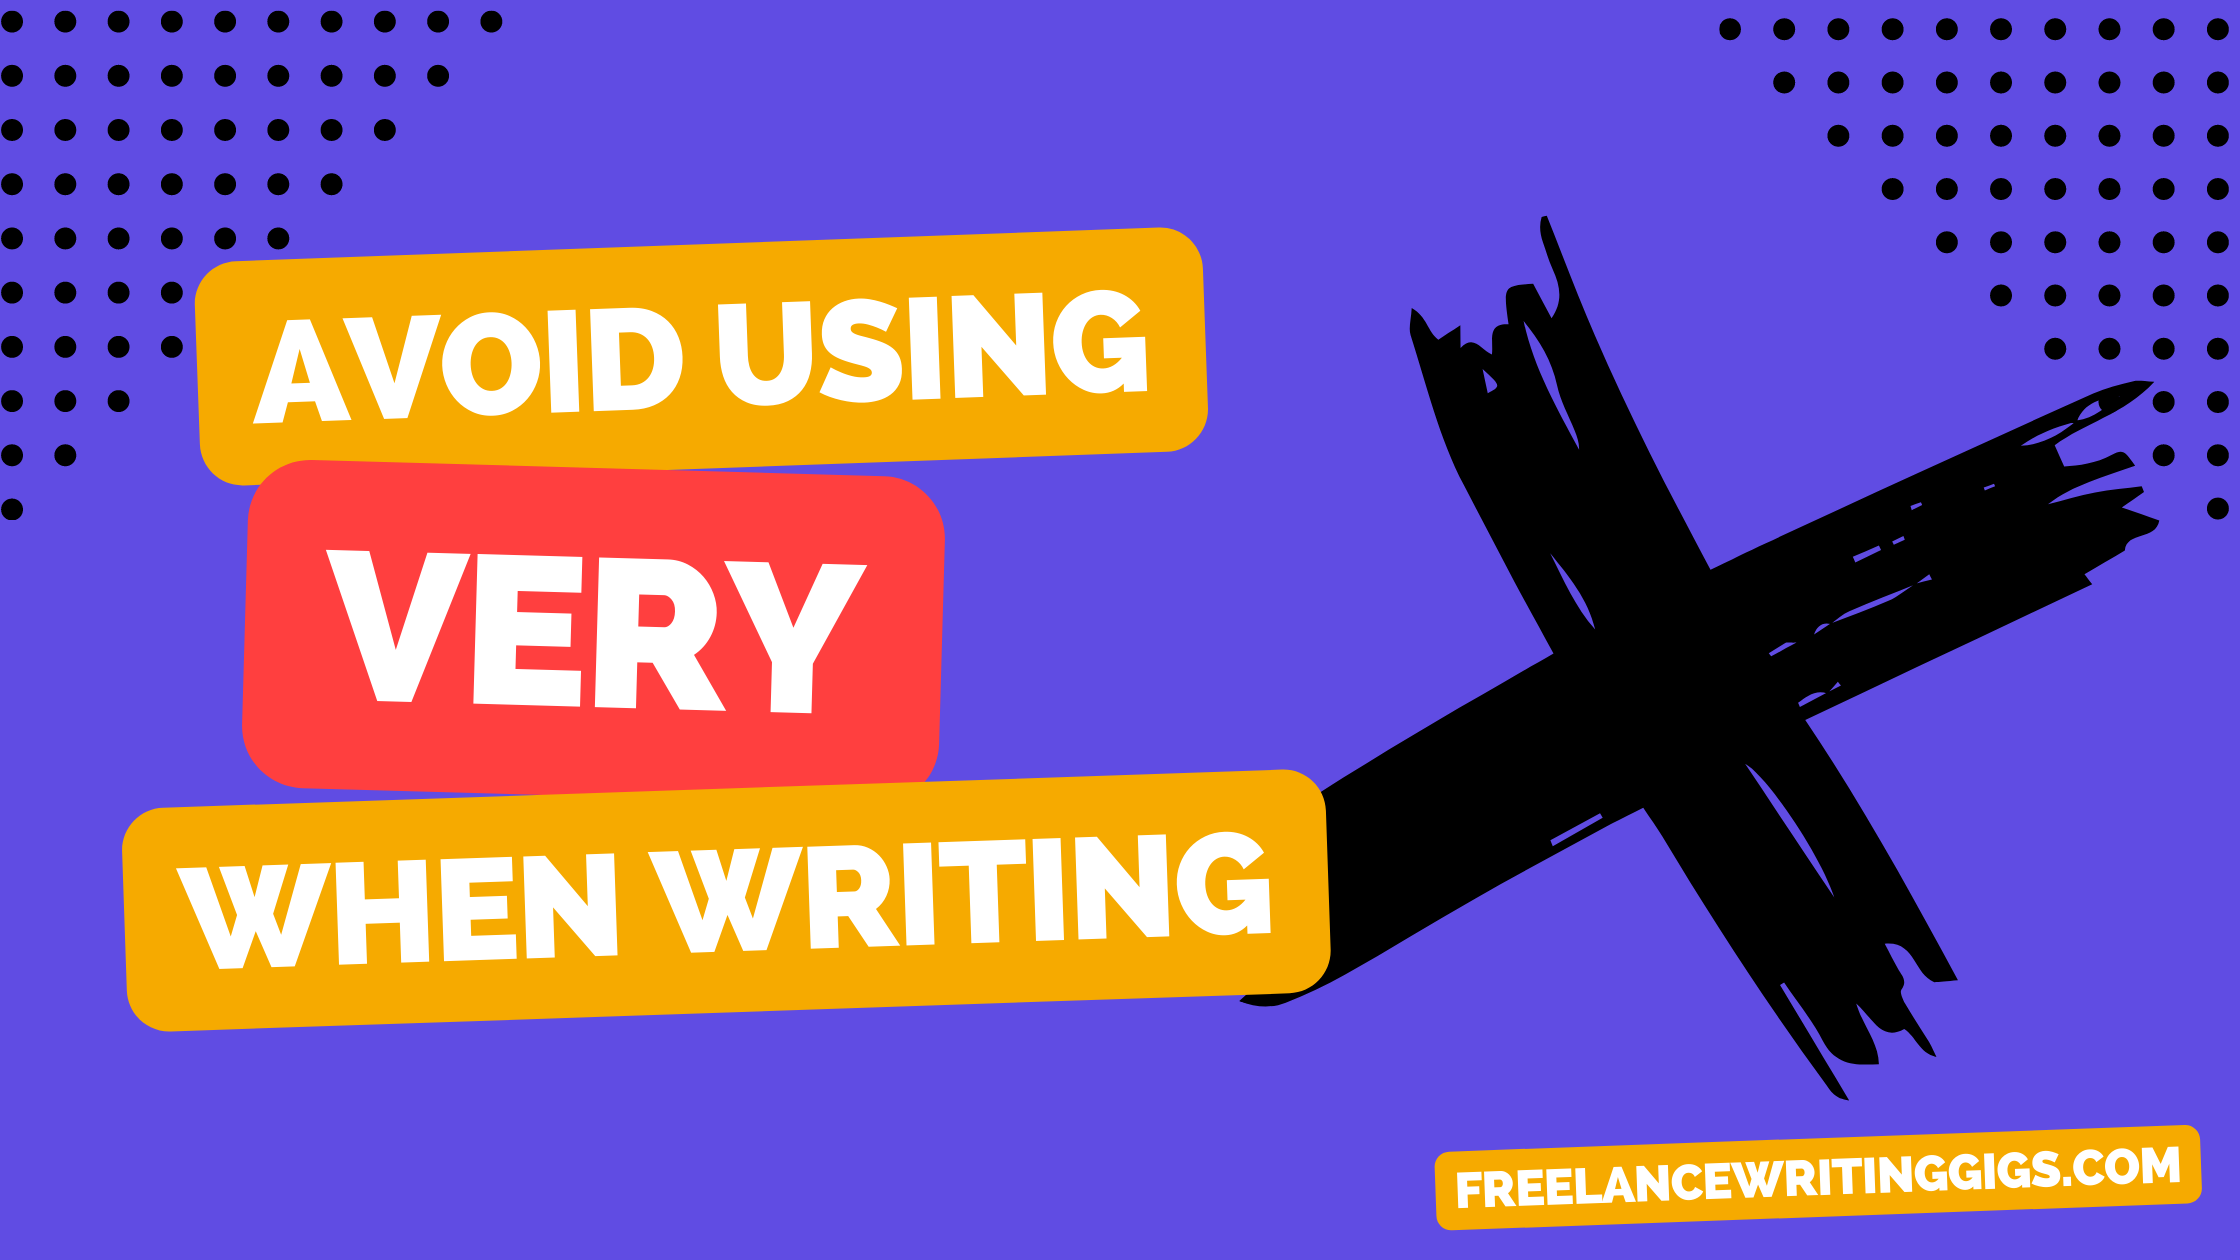 Avoid Using “Very” Because It Makes Your Writing Very Weak